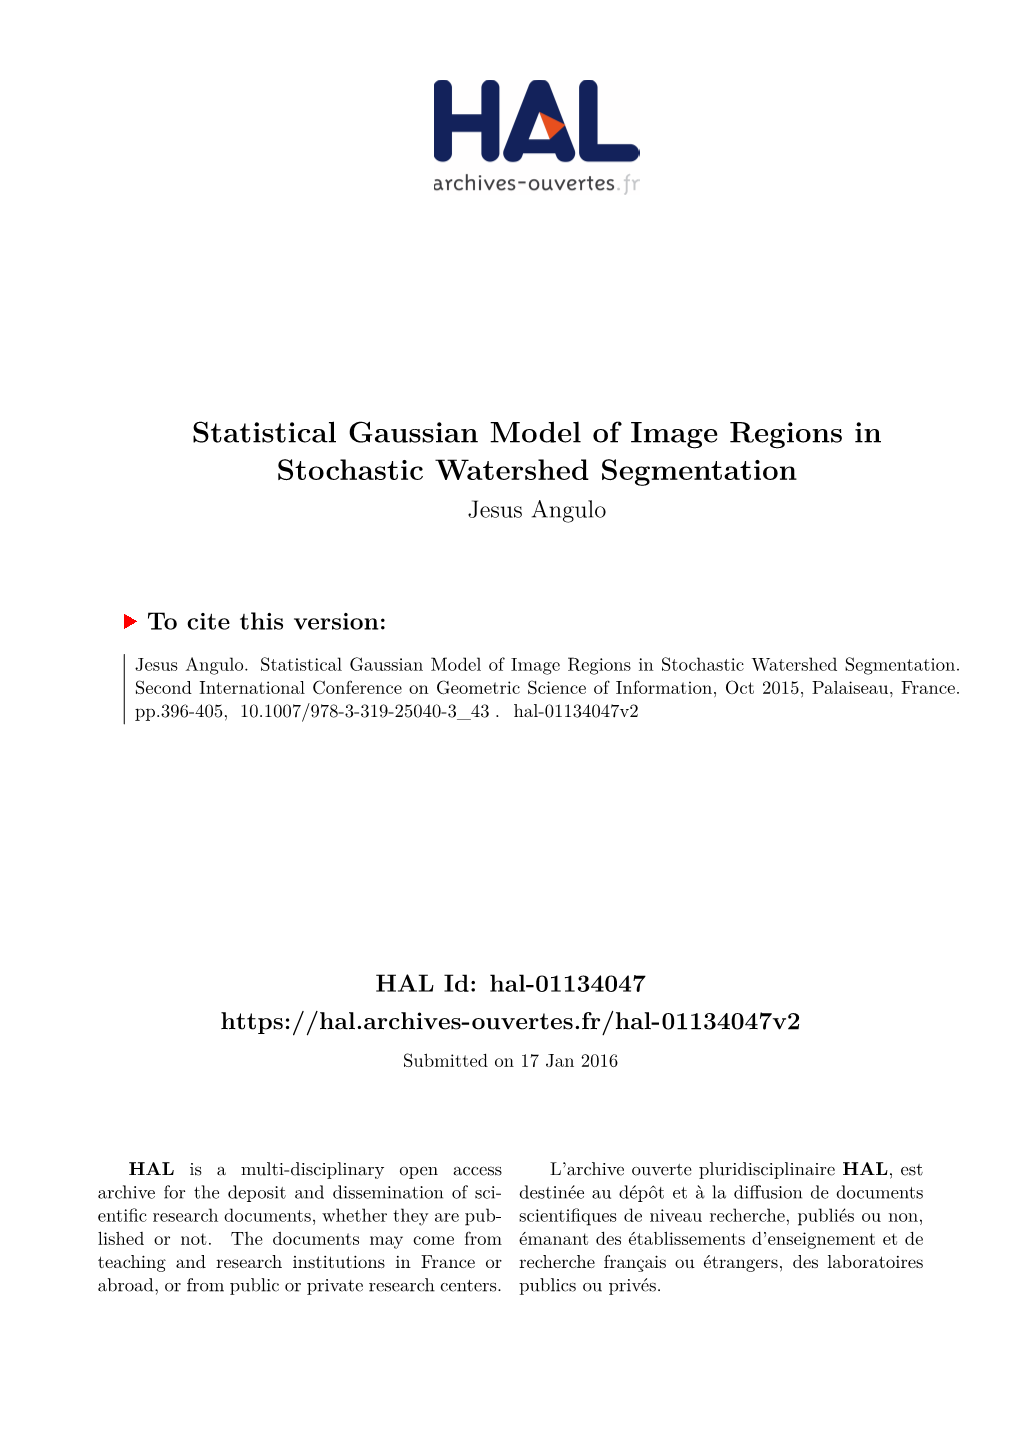 Statistical Gaussian Model of Image Regions in Stochastic Watershed Segmentation Jesus Angulo